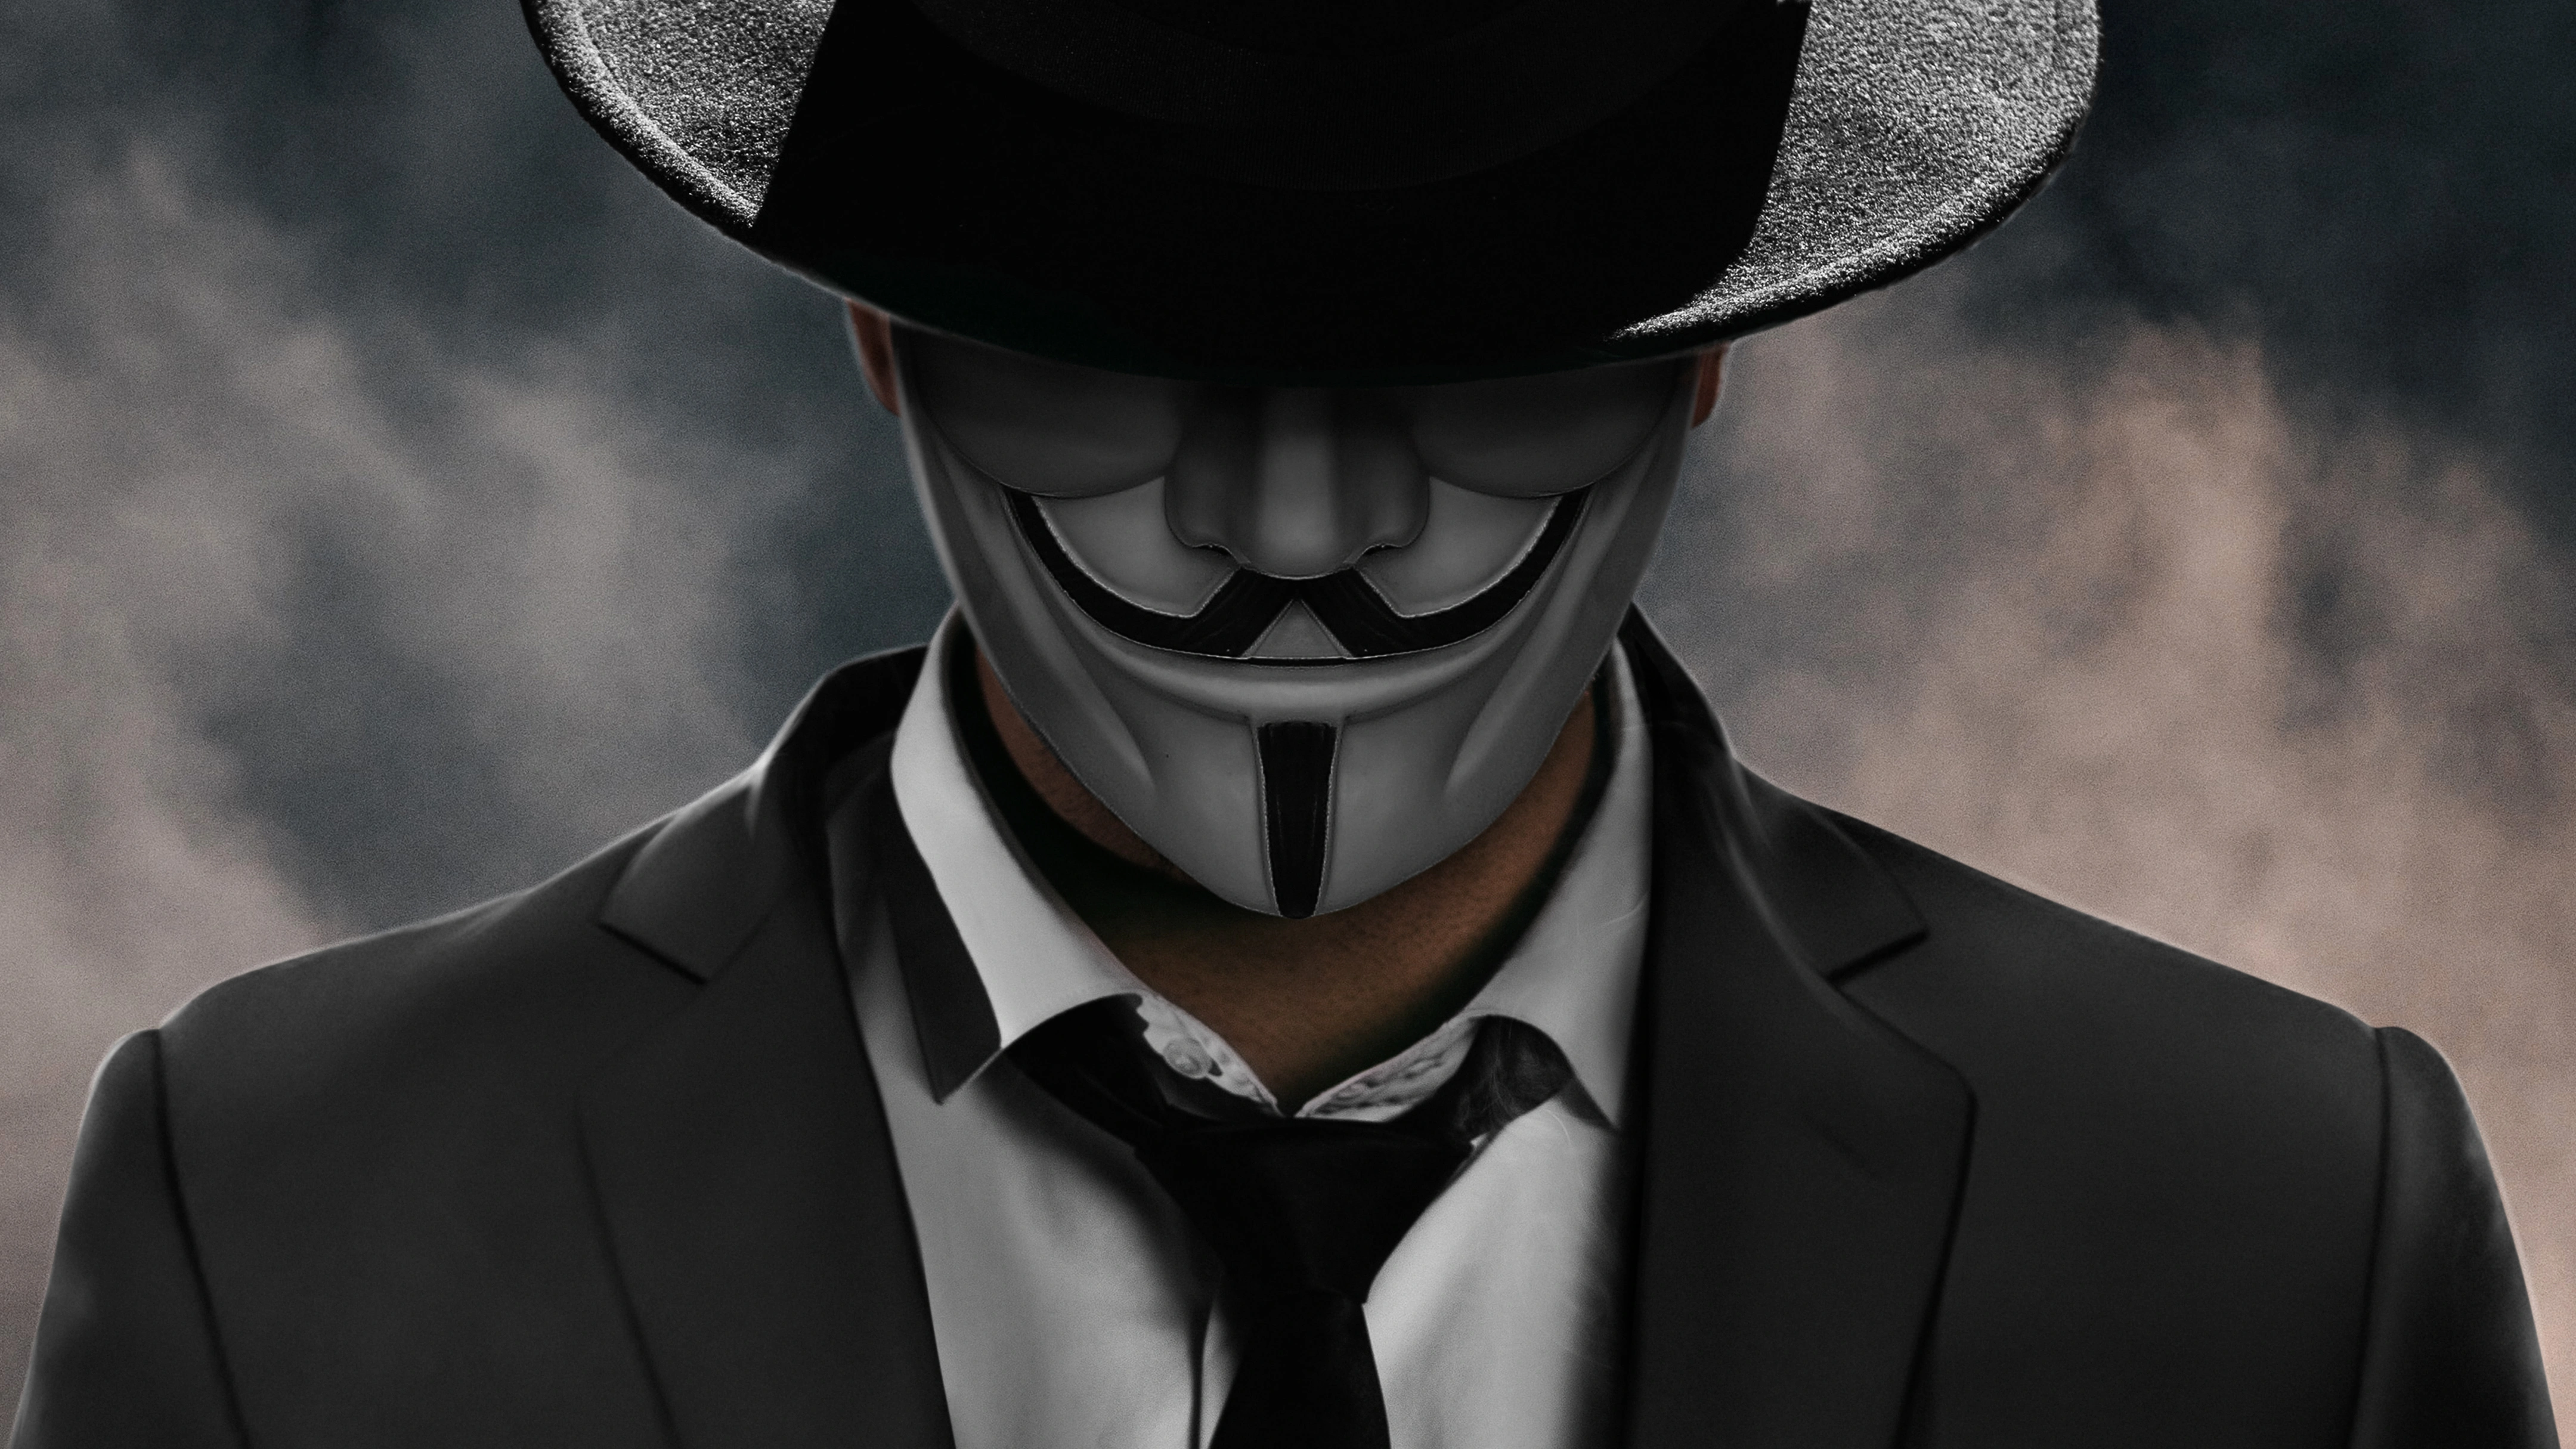 anonymus man in suit x4.jpg